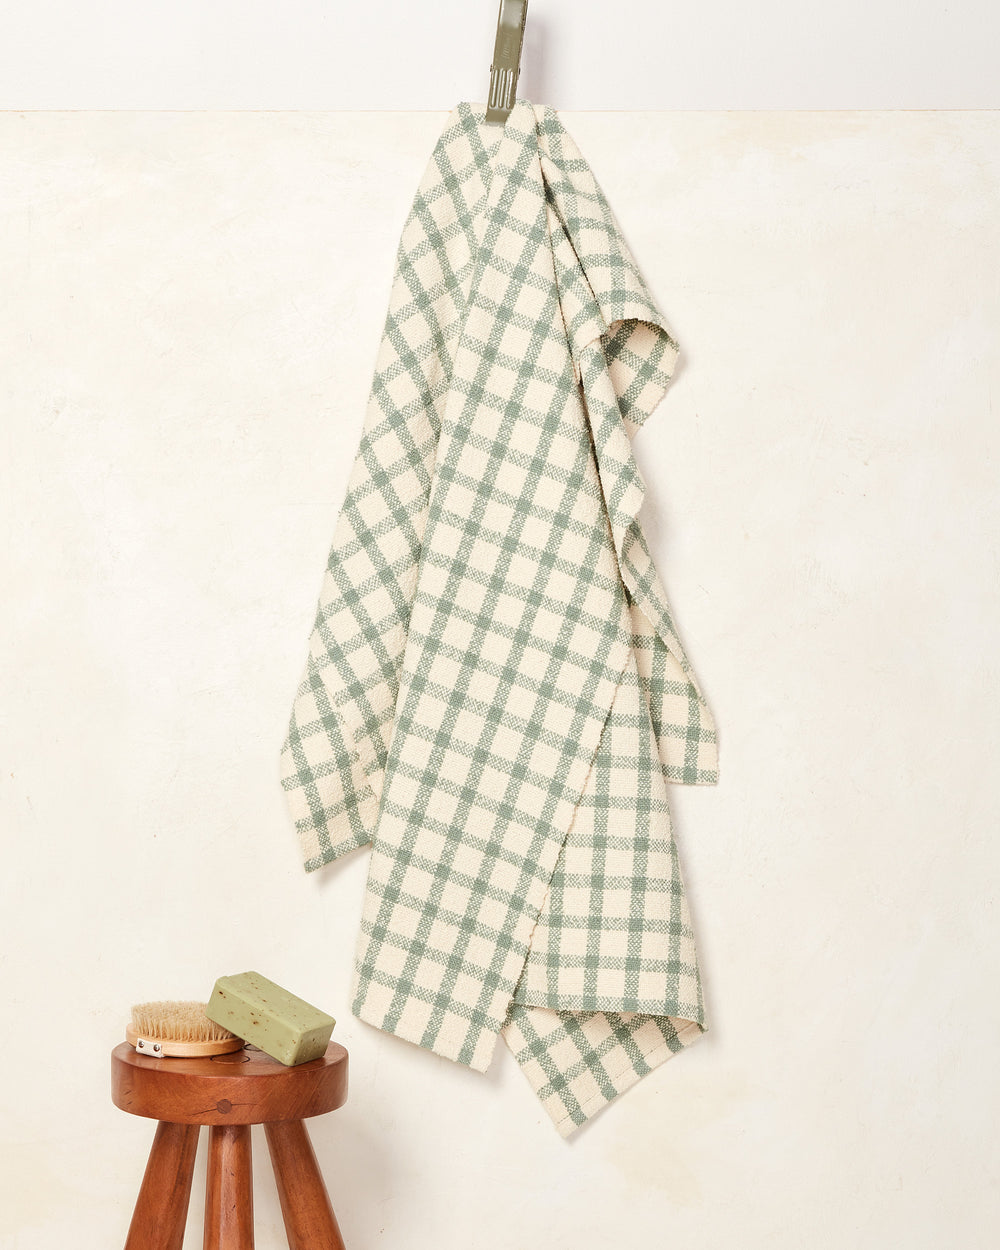 Now Designs Extra Large Wovern Cotton Kitchen Dish Towels Sage